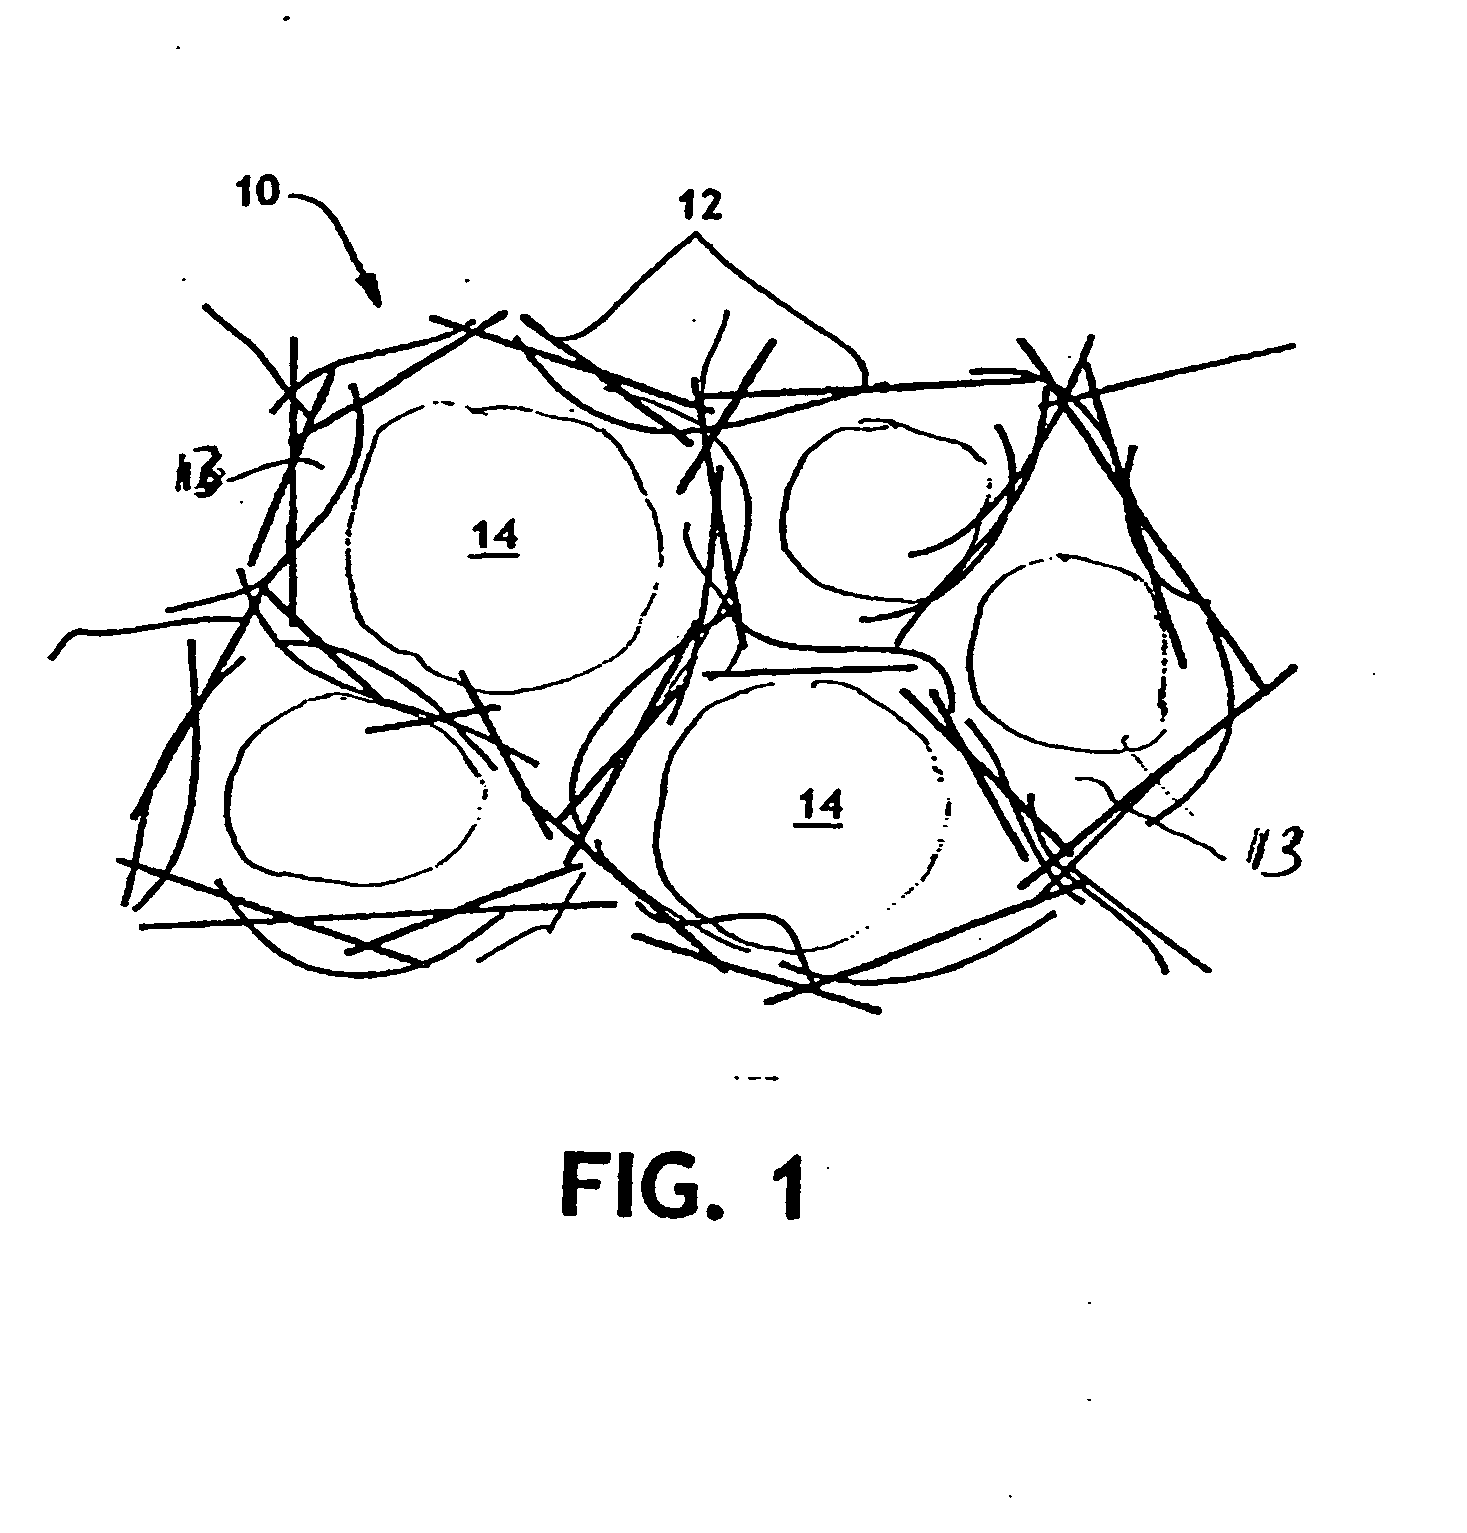 Devices for the delivery of molecular sieve materials for the formation of blood clots